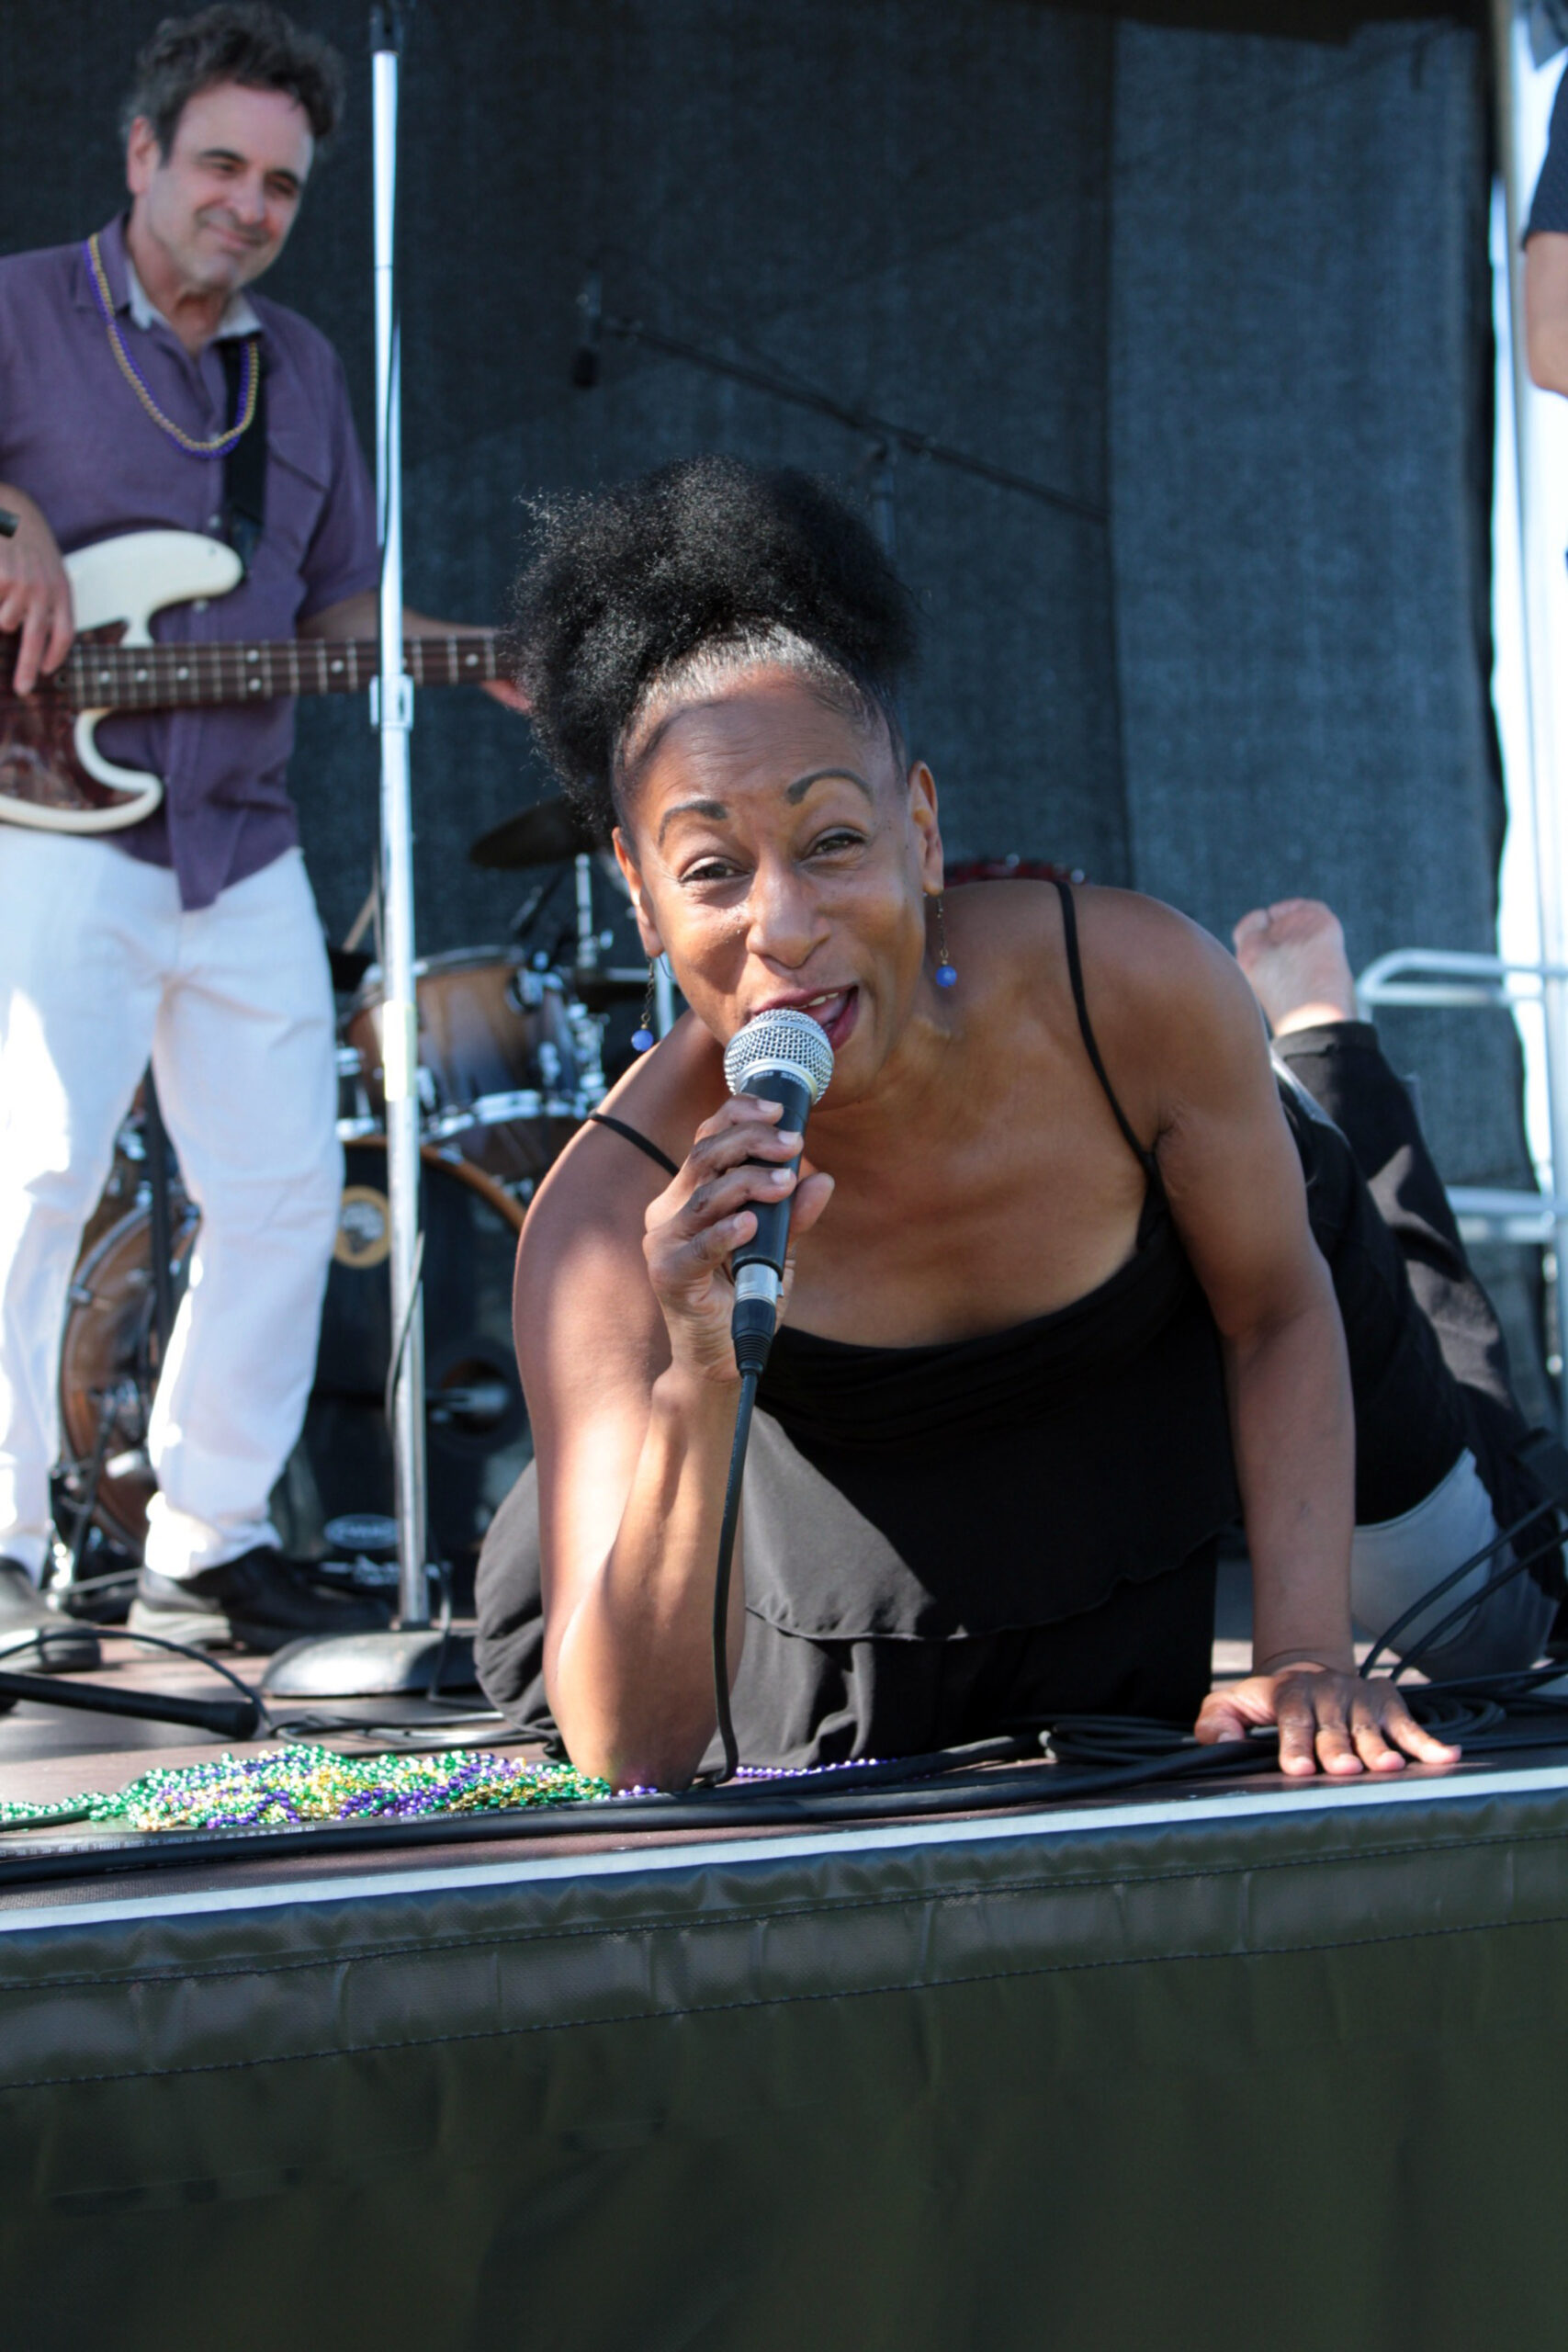 Singer Dawnette Darden and bass/guitar player Joe Lauro perform with the HooDoo Loungers on September 25 as part of the Sag Harbor American Music Festival. TOM KOCHIE